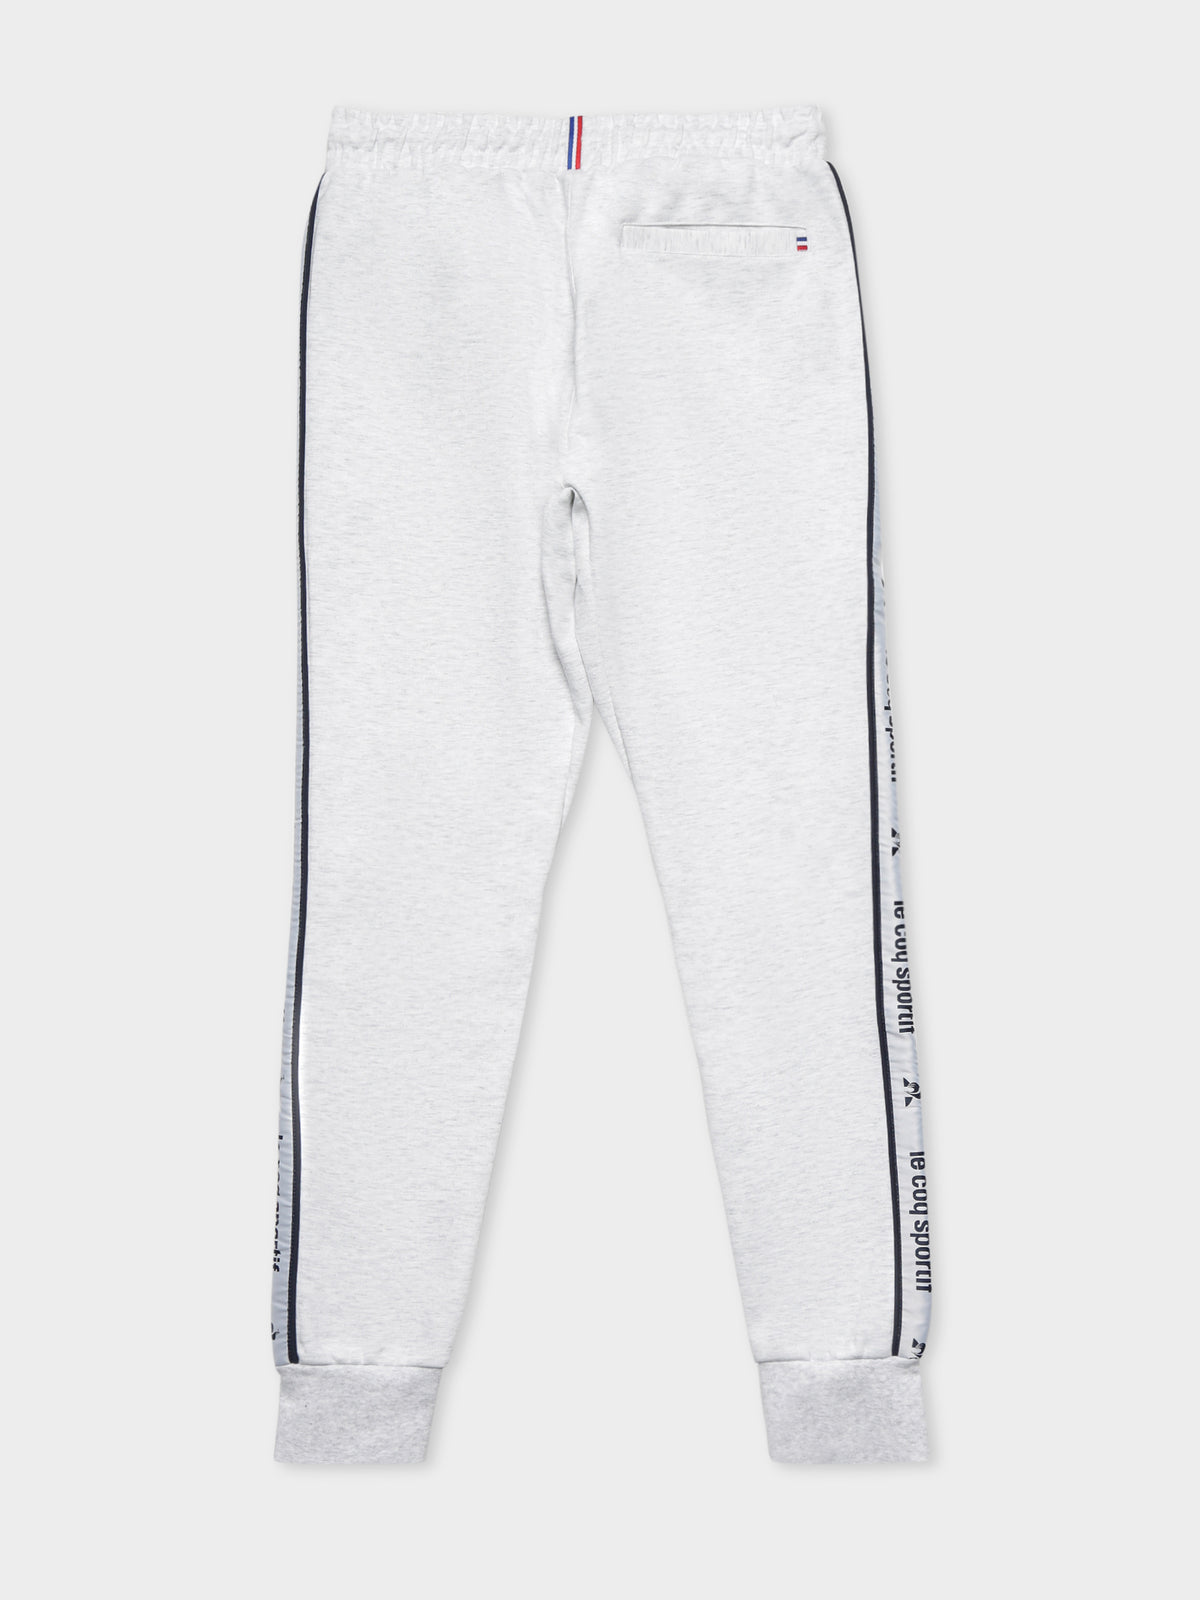 Royale Track Pants in Snow Marle